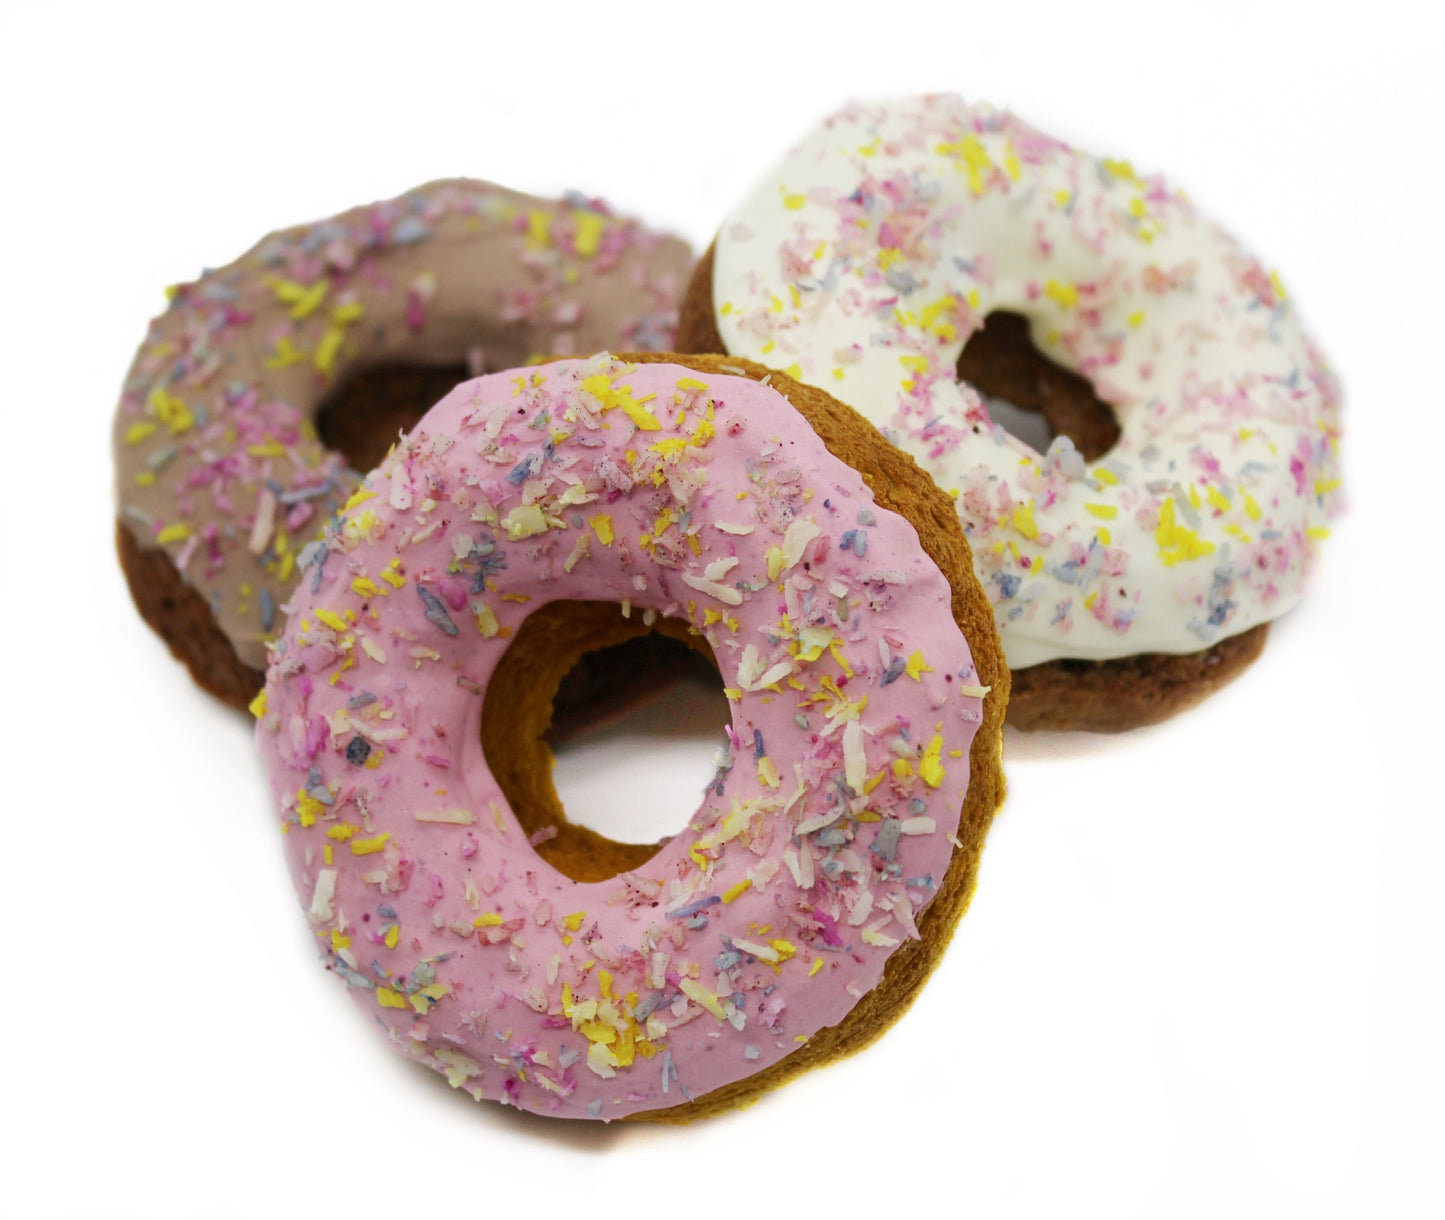 Three Frosted dog donuts with rainbow coconut flakes. Dog donuts are frosted in pink, white, and carob. 